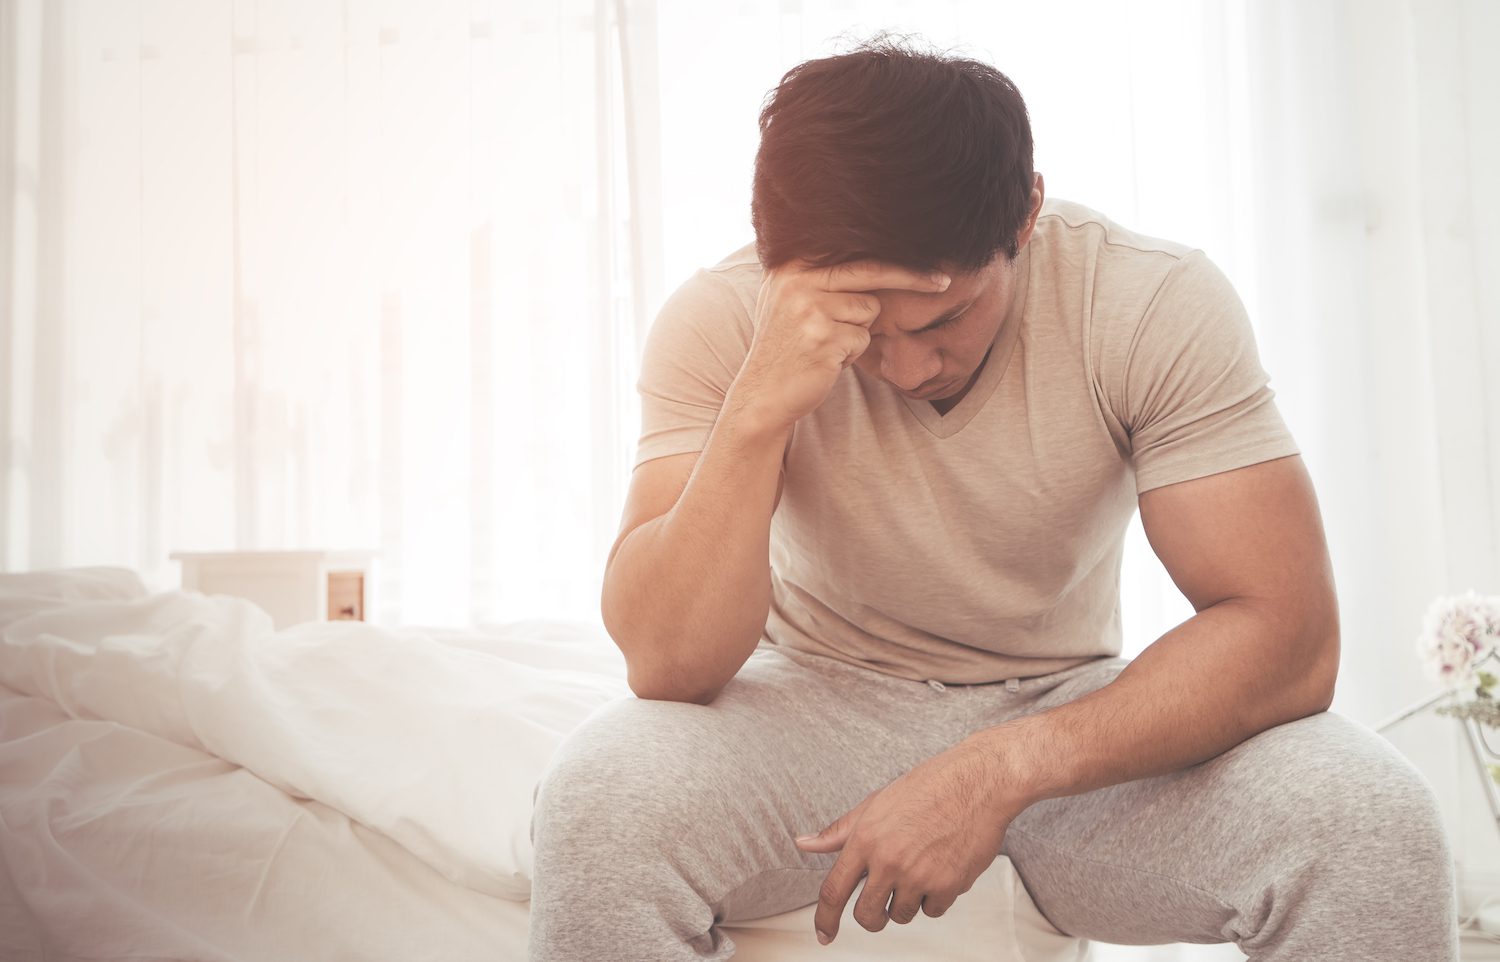 Man waking up and holding head in frustration